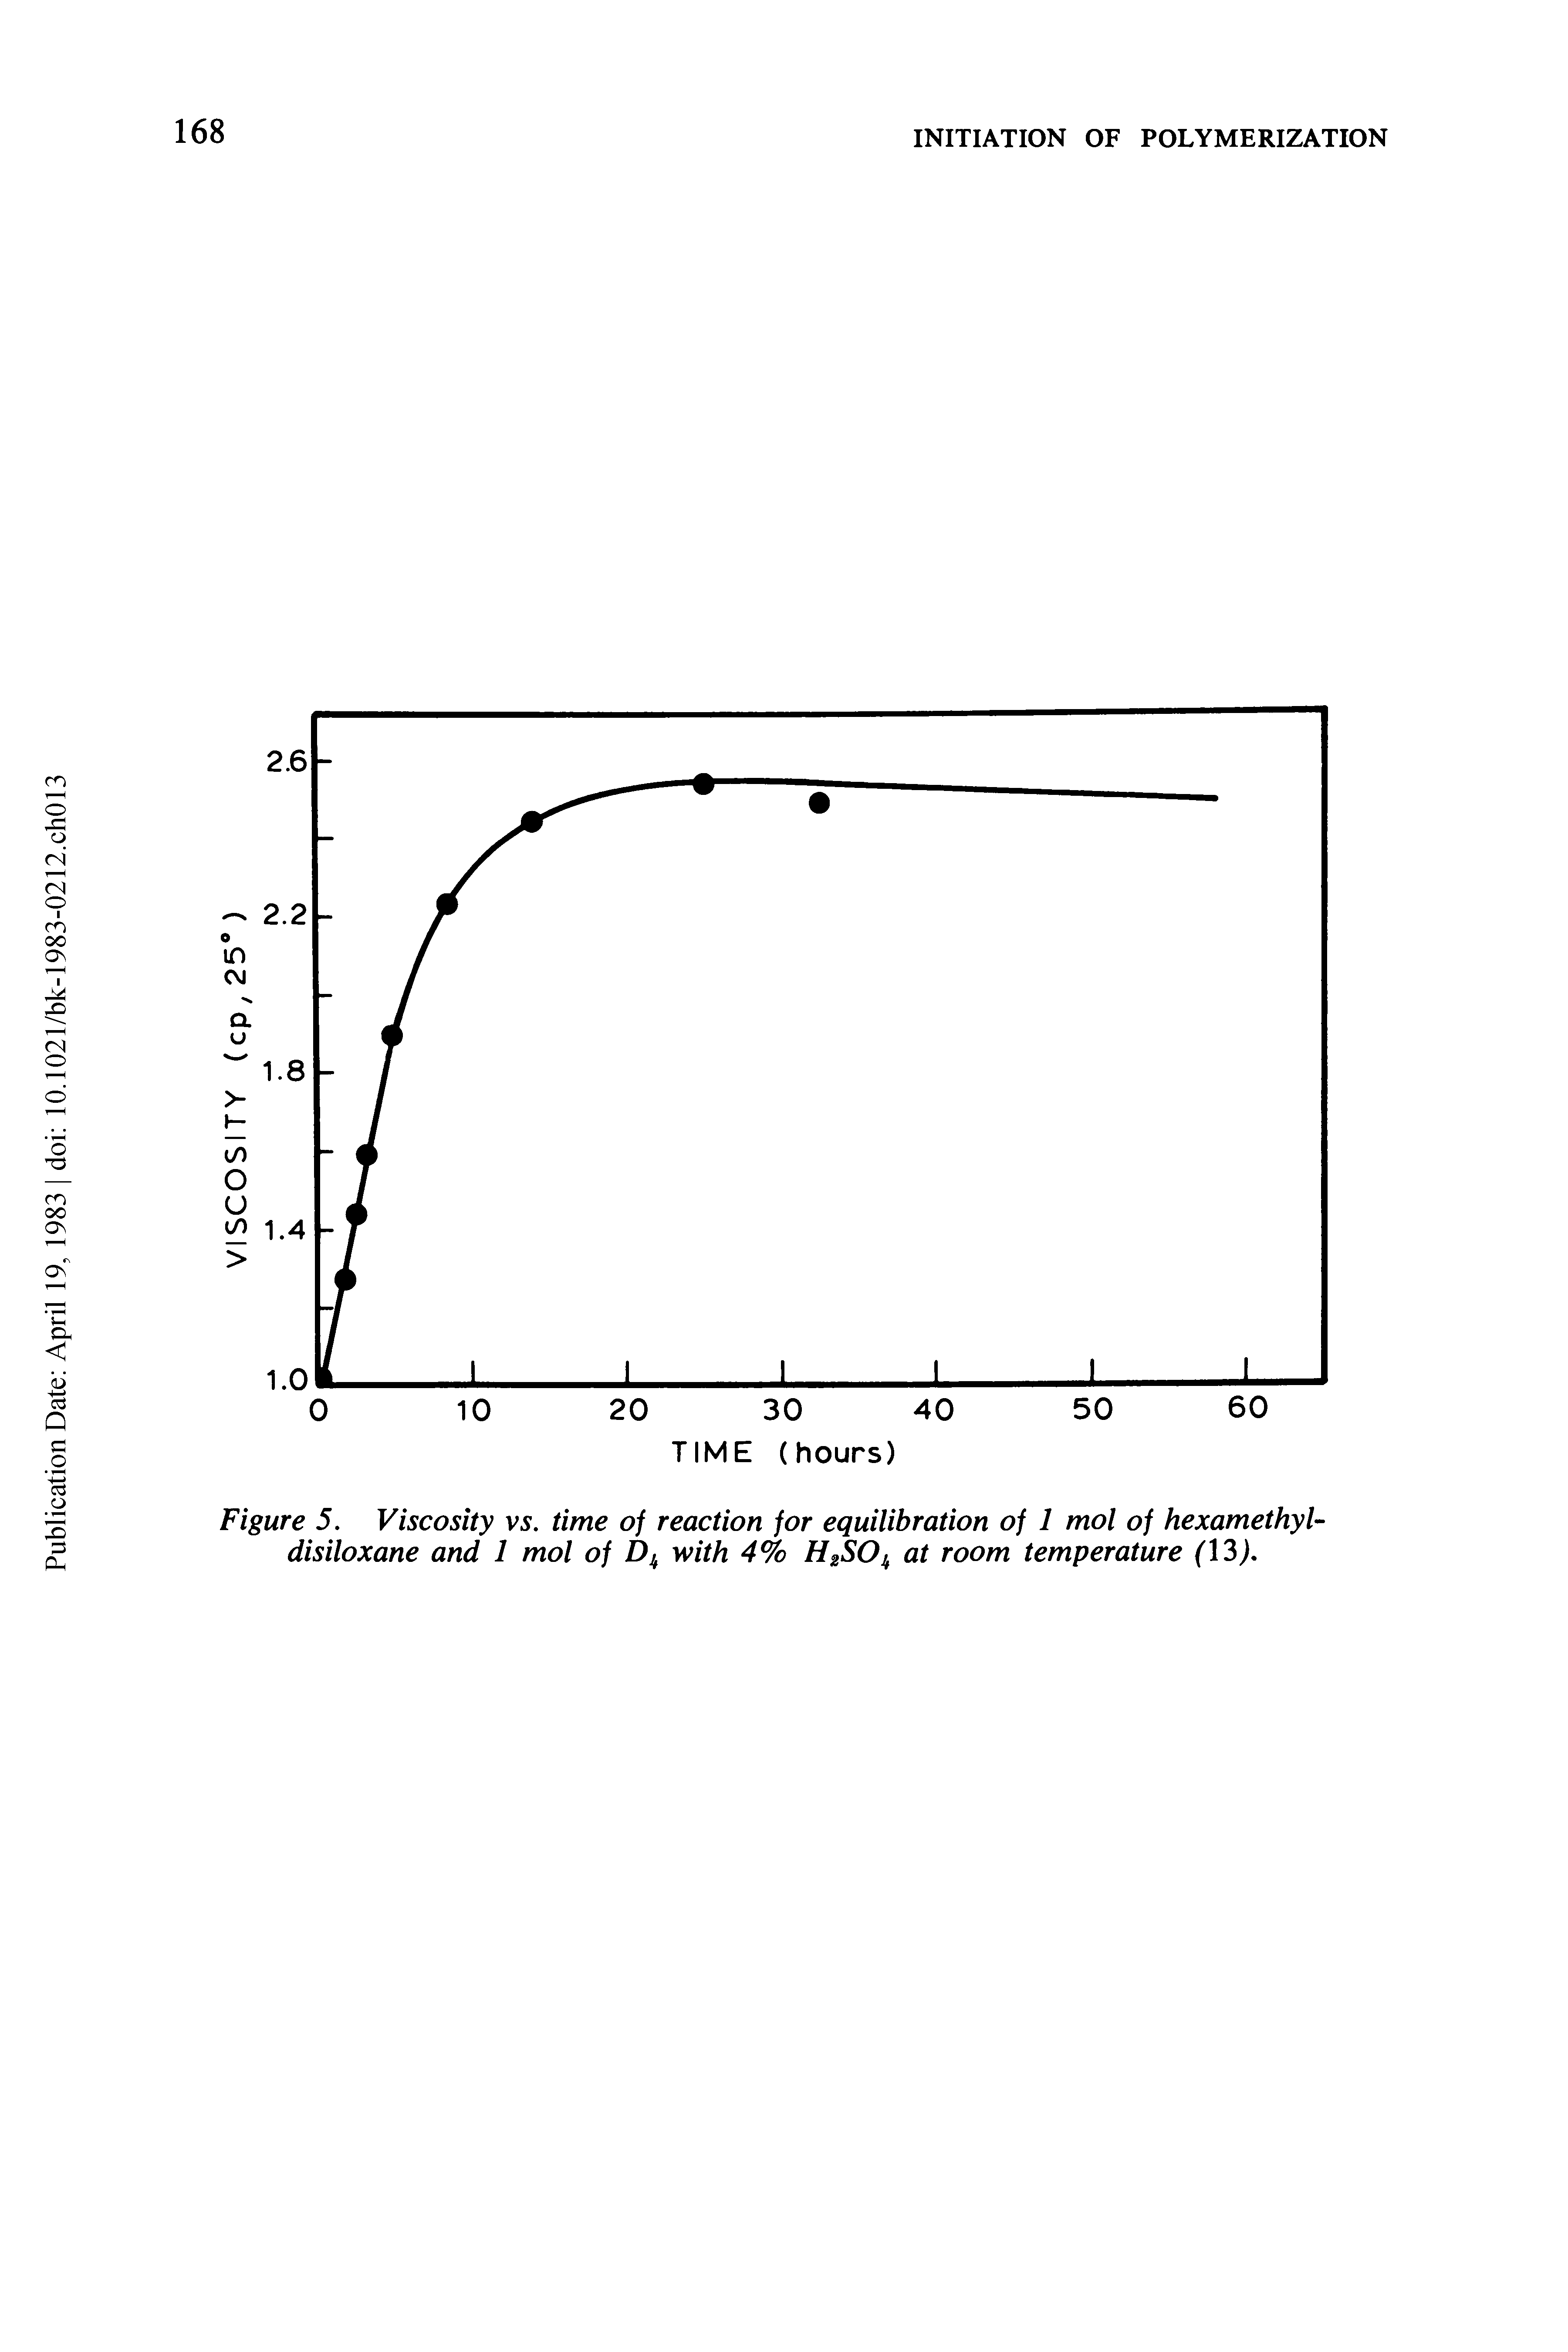 Figure 5. Viscosity V5. time of reaction for equilibration of 1 mol of hexamethyU disiloxane and 1 mol of with 4% HzSO at room temperature ( 3).